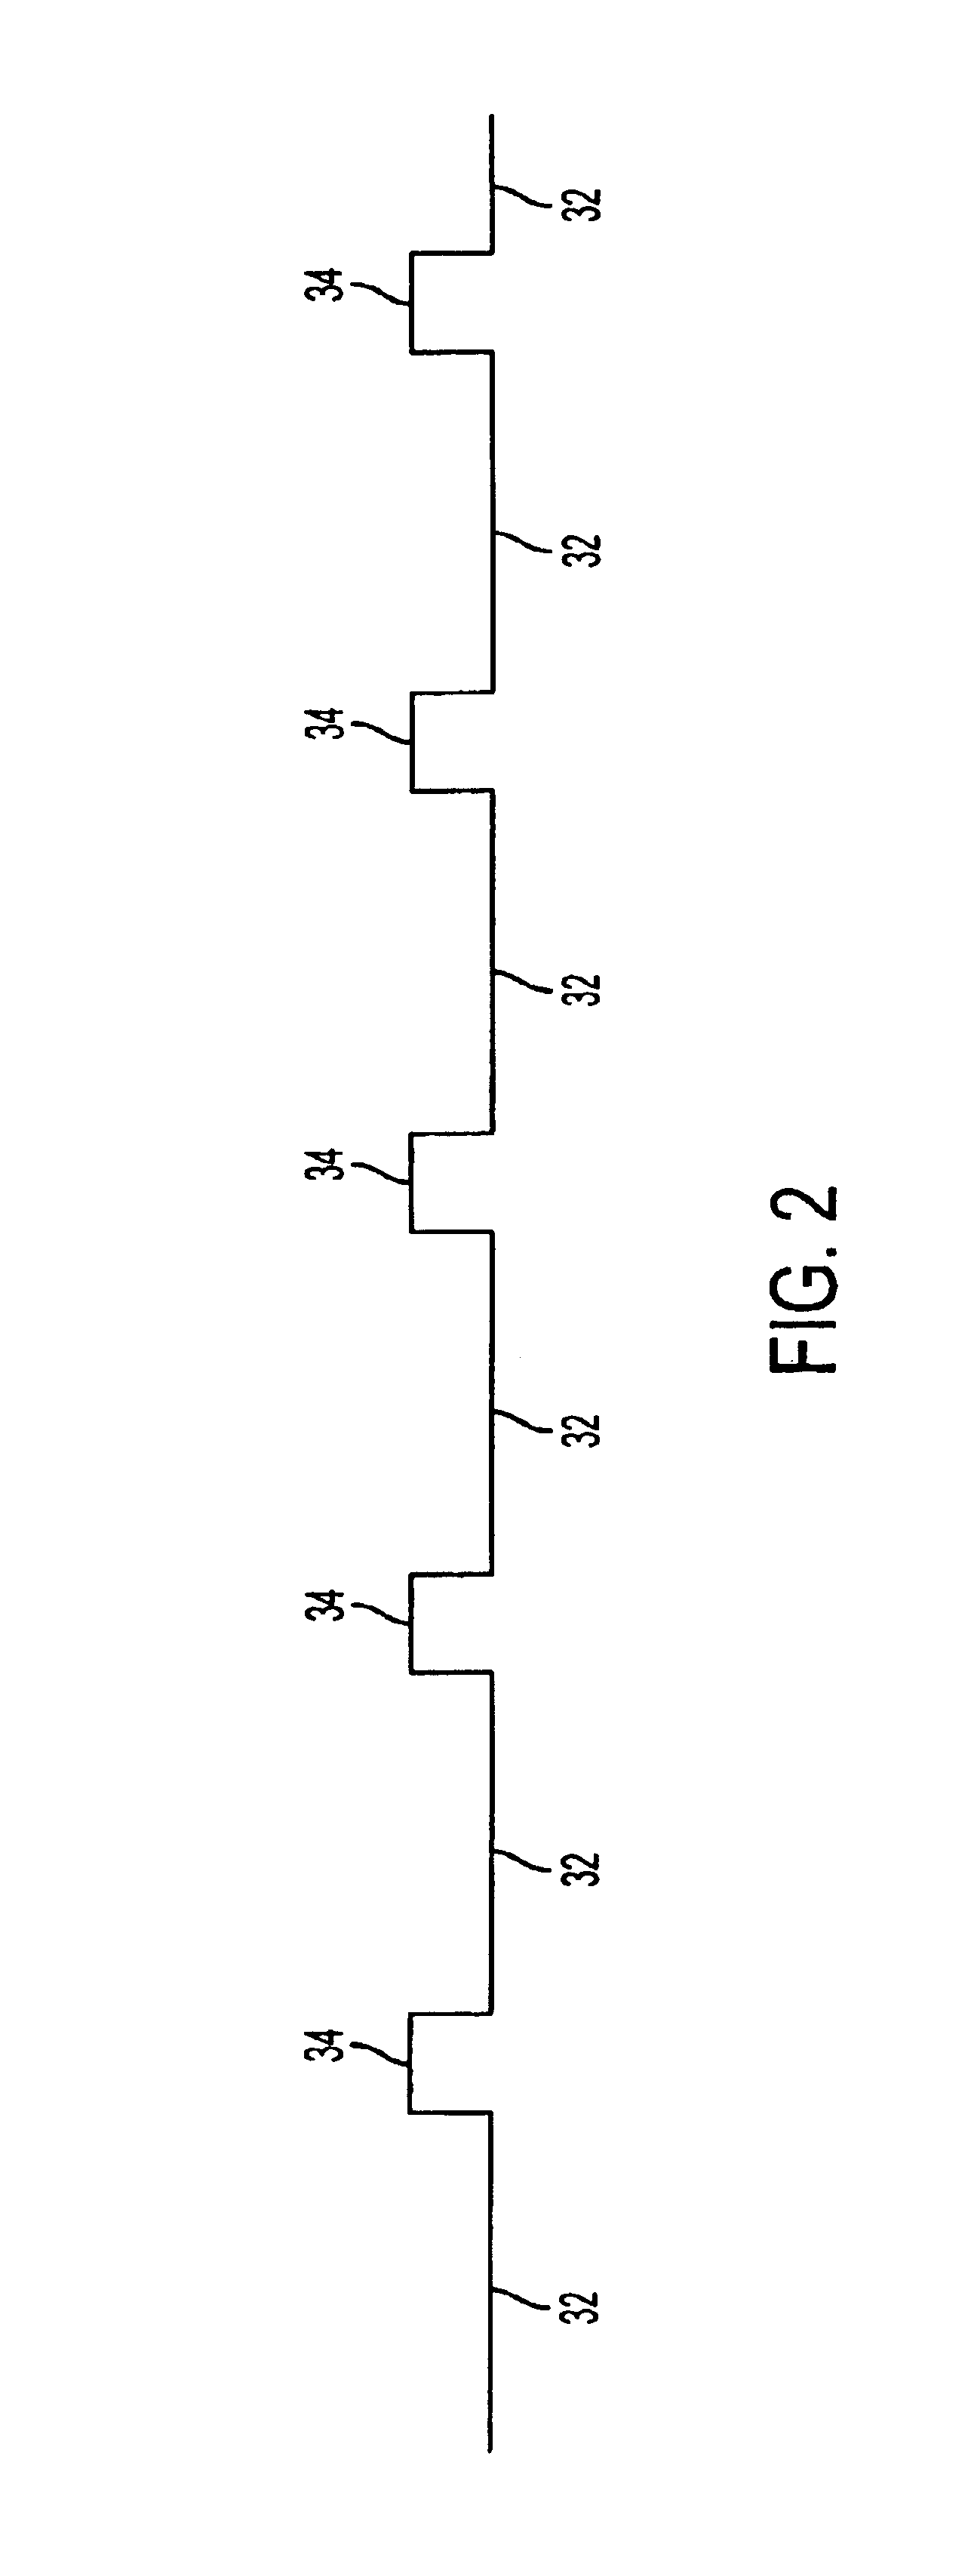 Apparatus, method and computer system for reducing power consumption of a processor or processors upon occurrence of a failure condition affecting the processor or processors